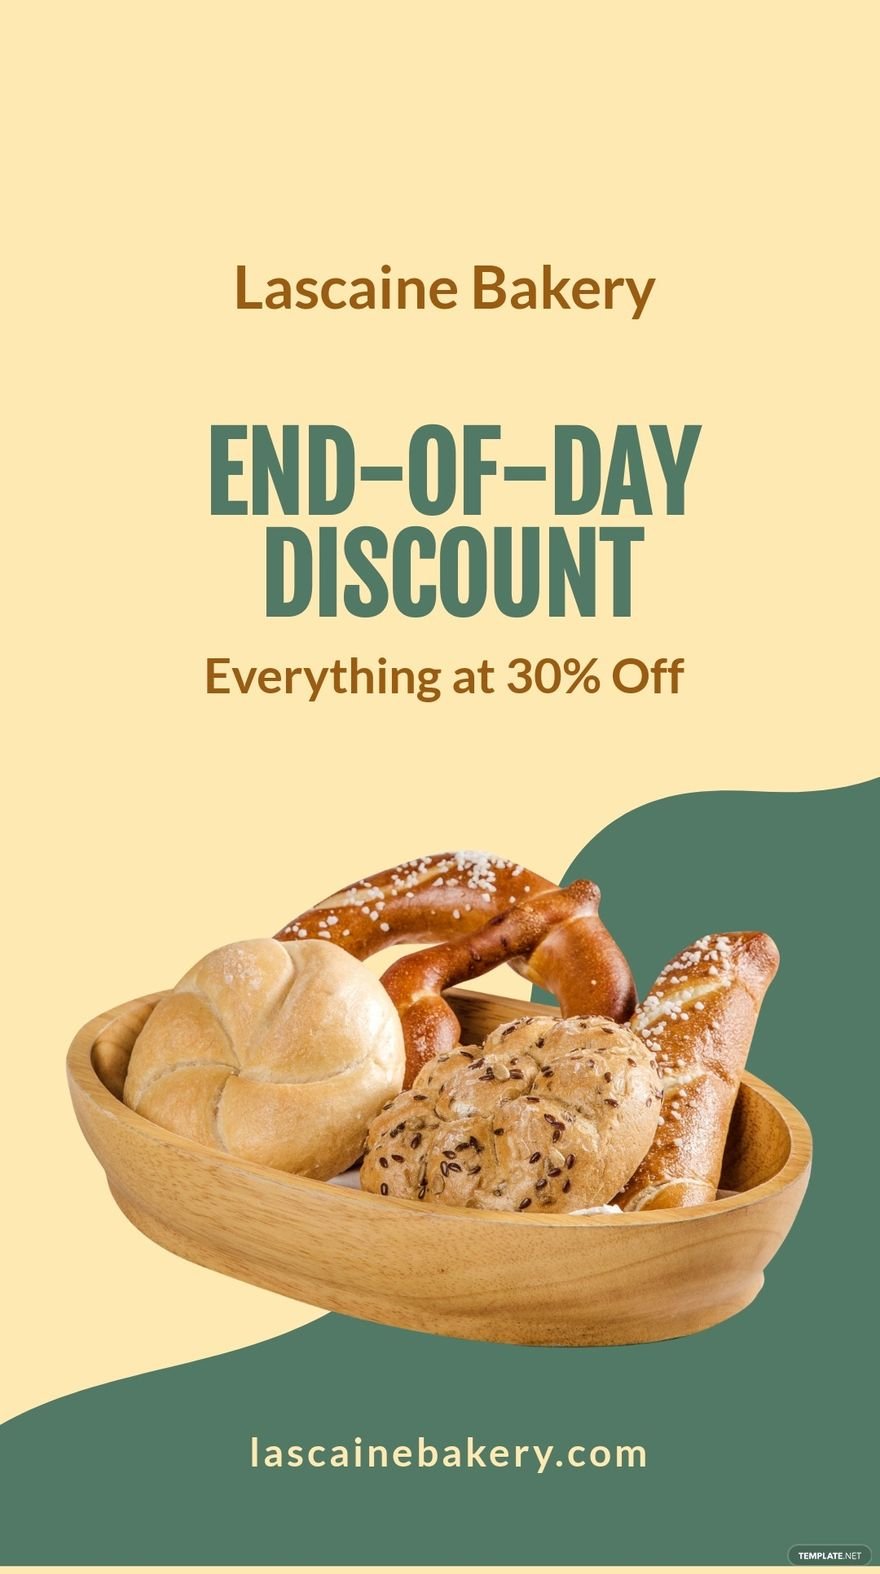 Free Bakery Discount Promotion Whatsapp Post Template